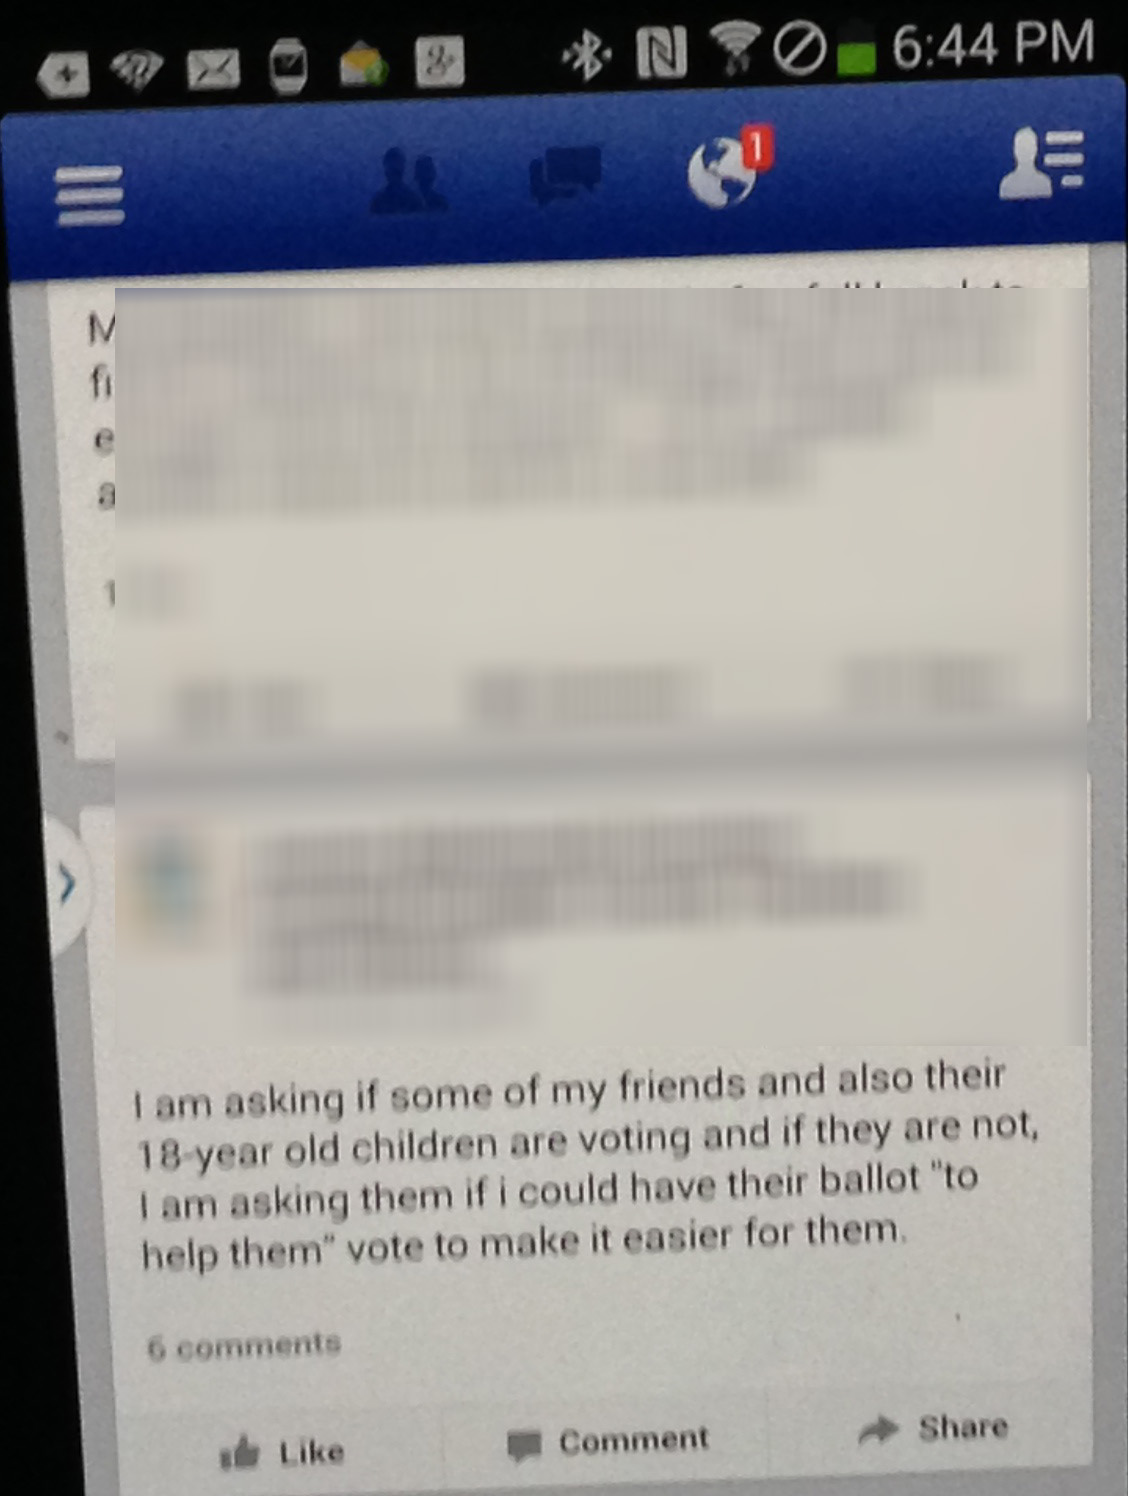 Facebook post asks for friends' ballots if they are not voting